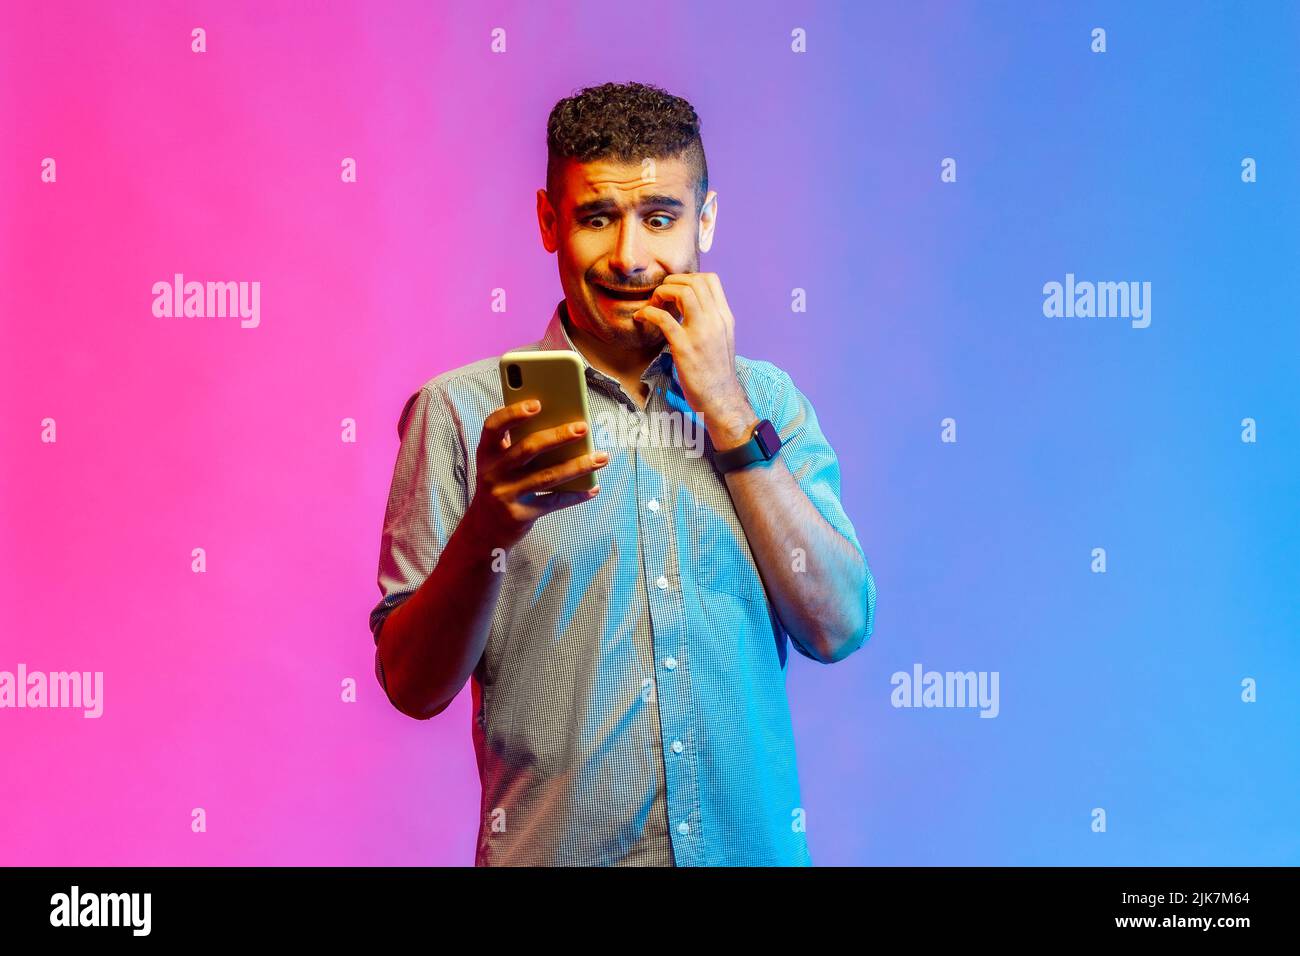 Scared man in shirt standing holding mobile phone, looking at display with fear, biting his finger nails, sees something terrible. Indoor studio shot isolated on colorful neon light background. Stock Photo